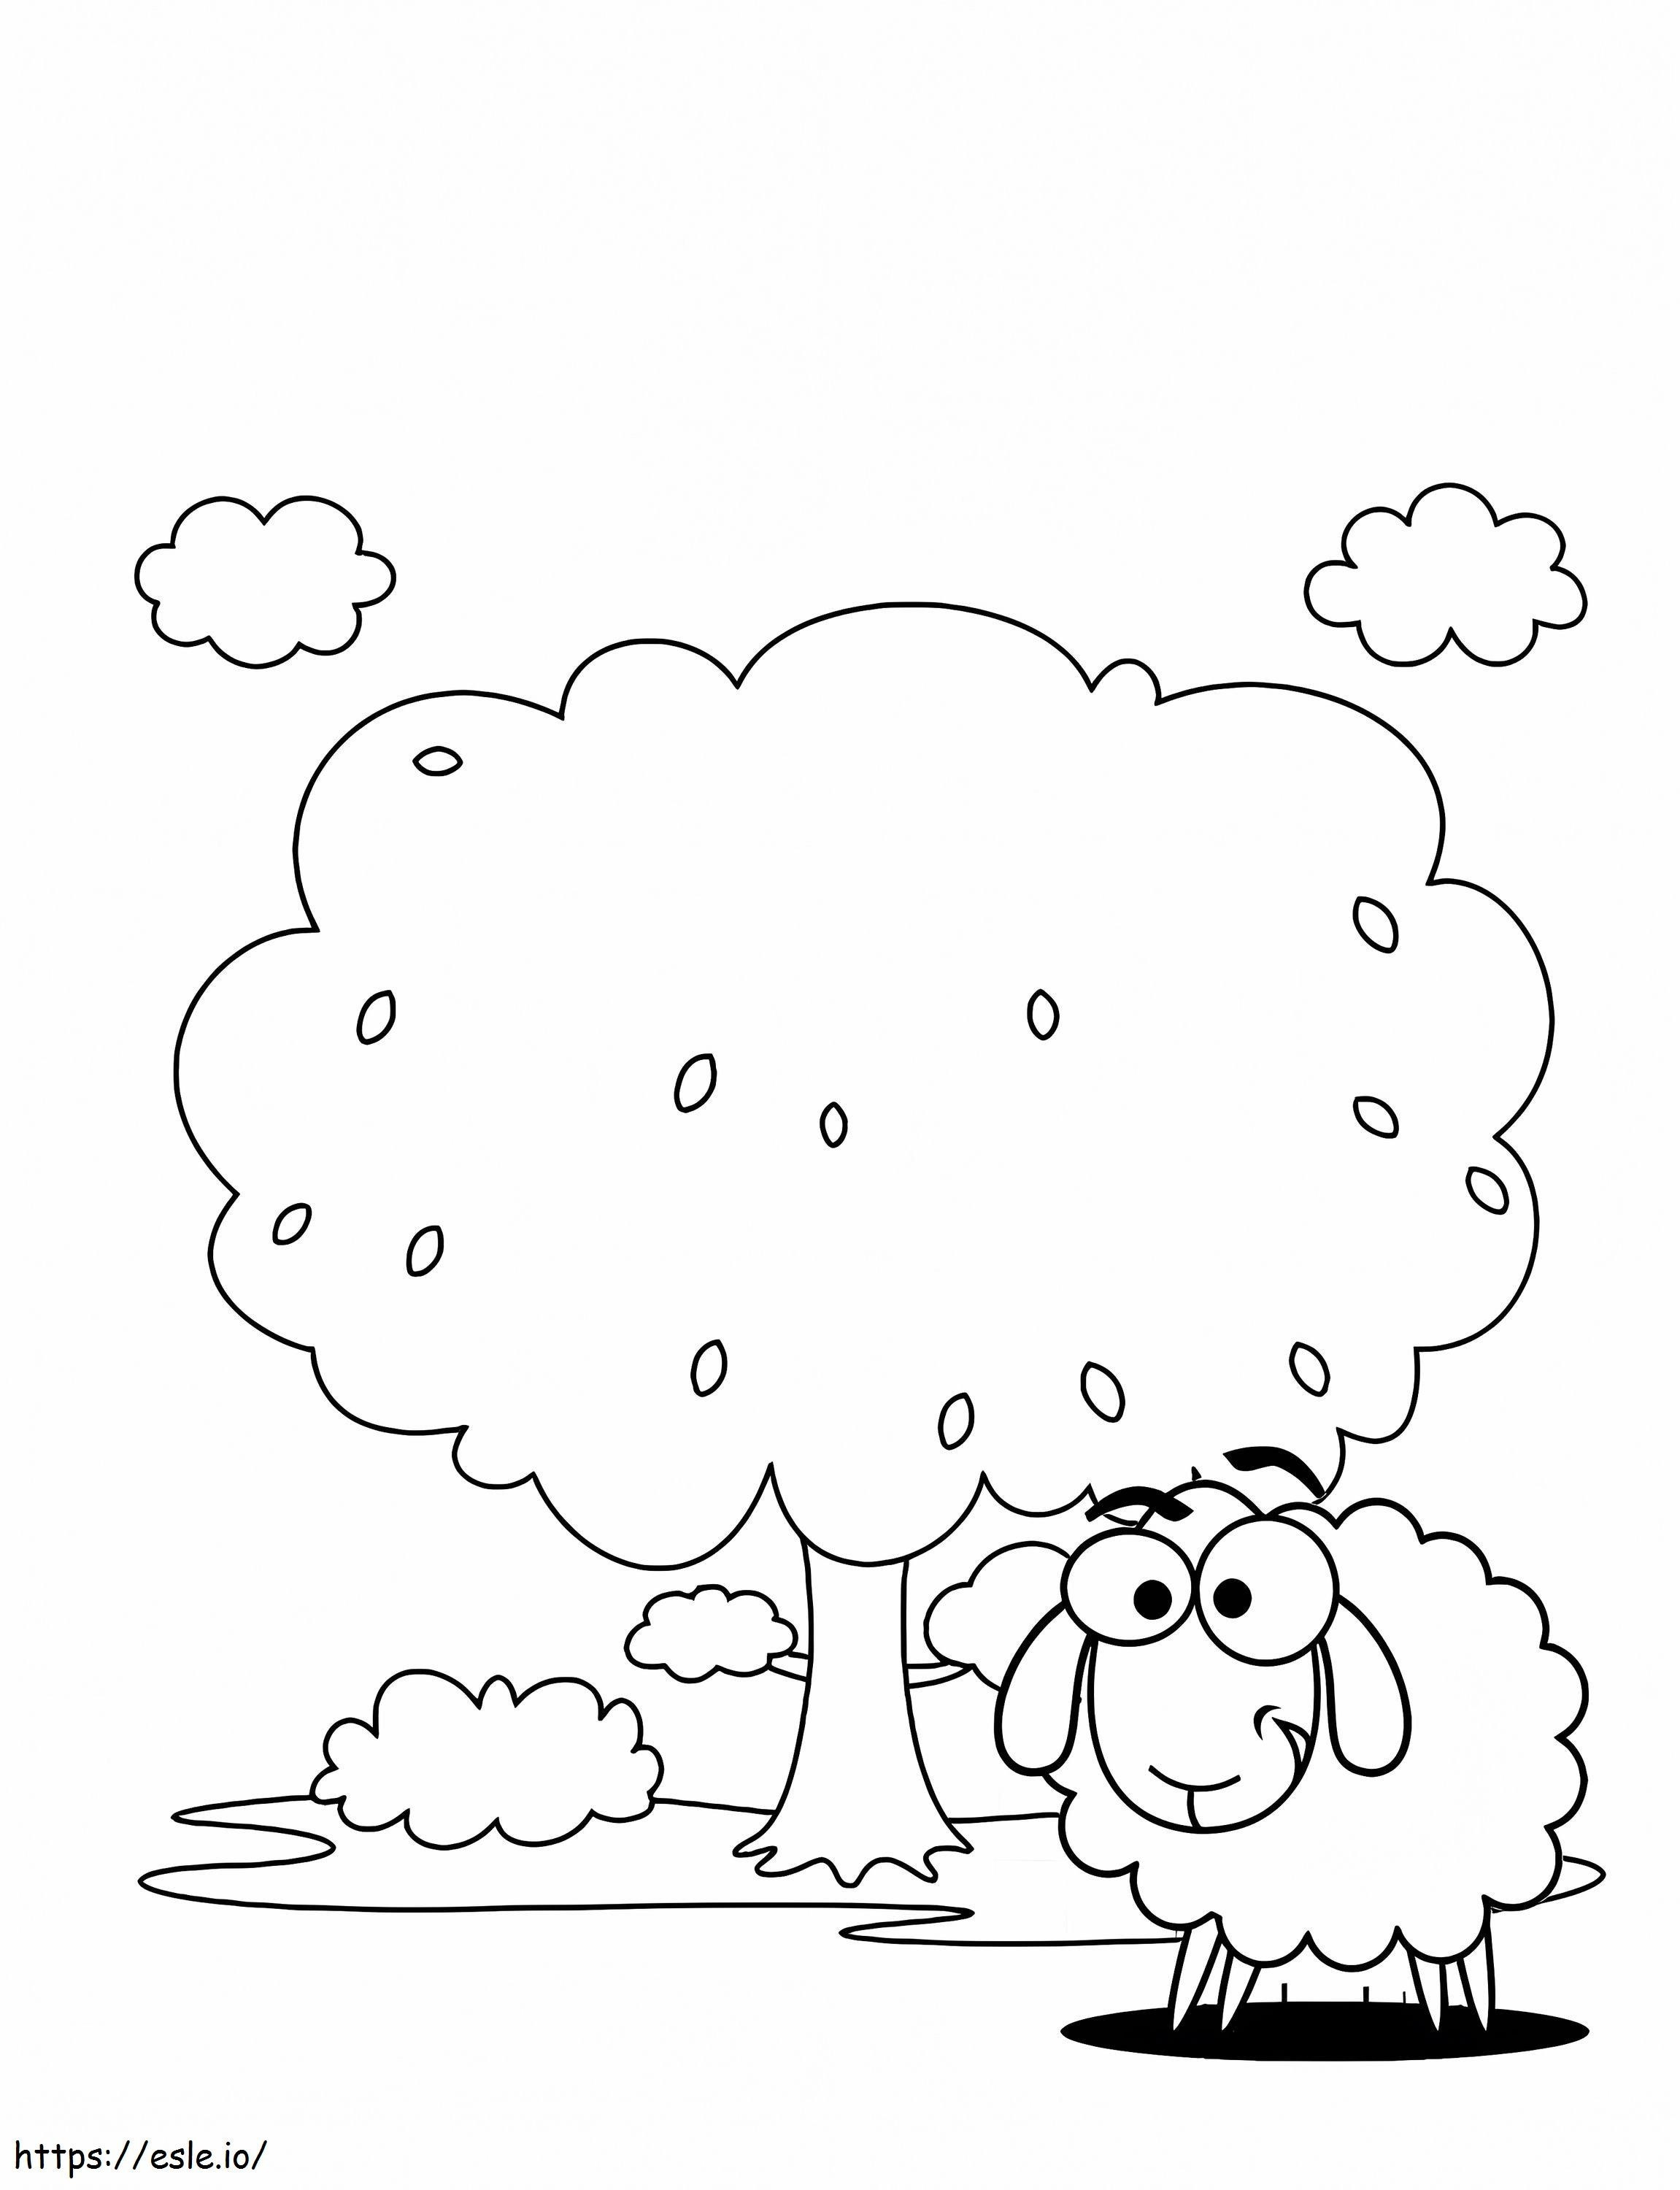 Sheep With Tree coloring page